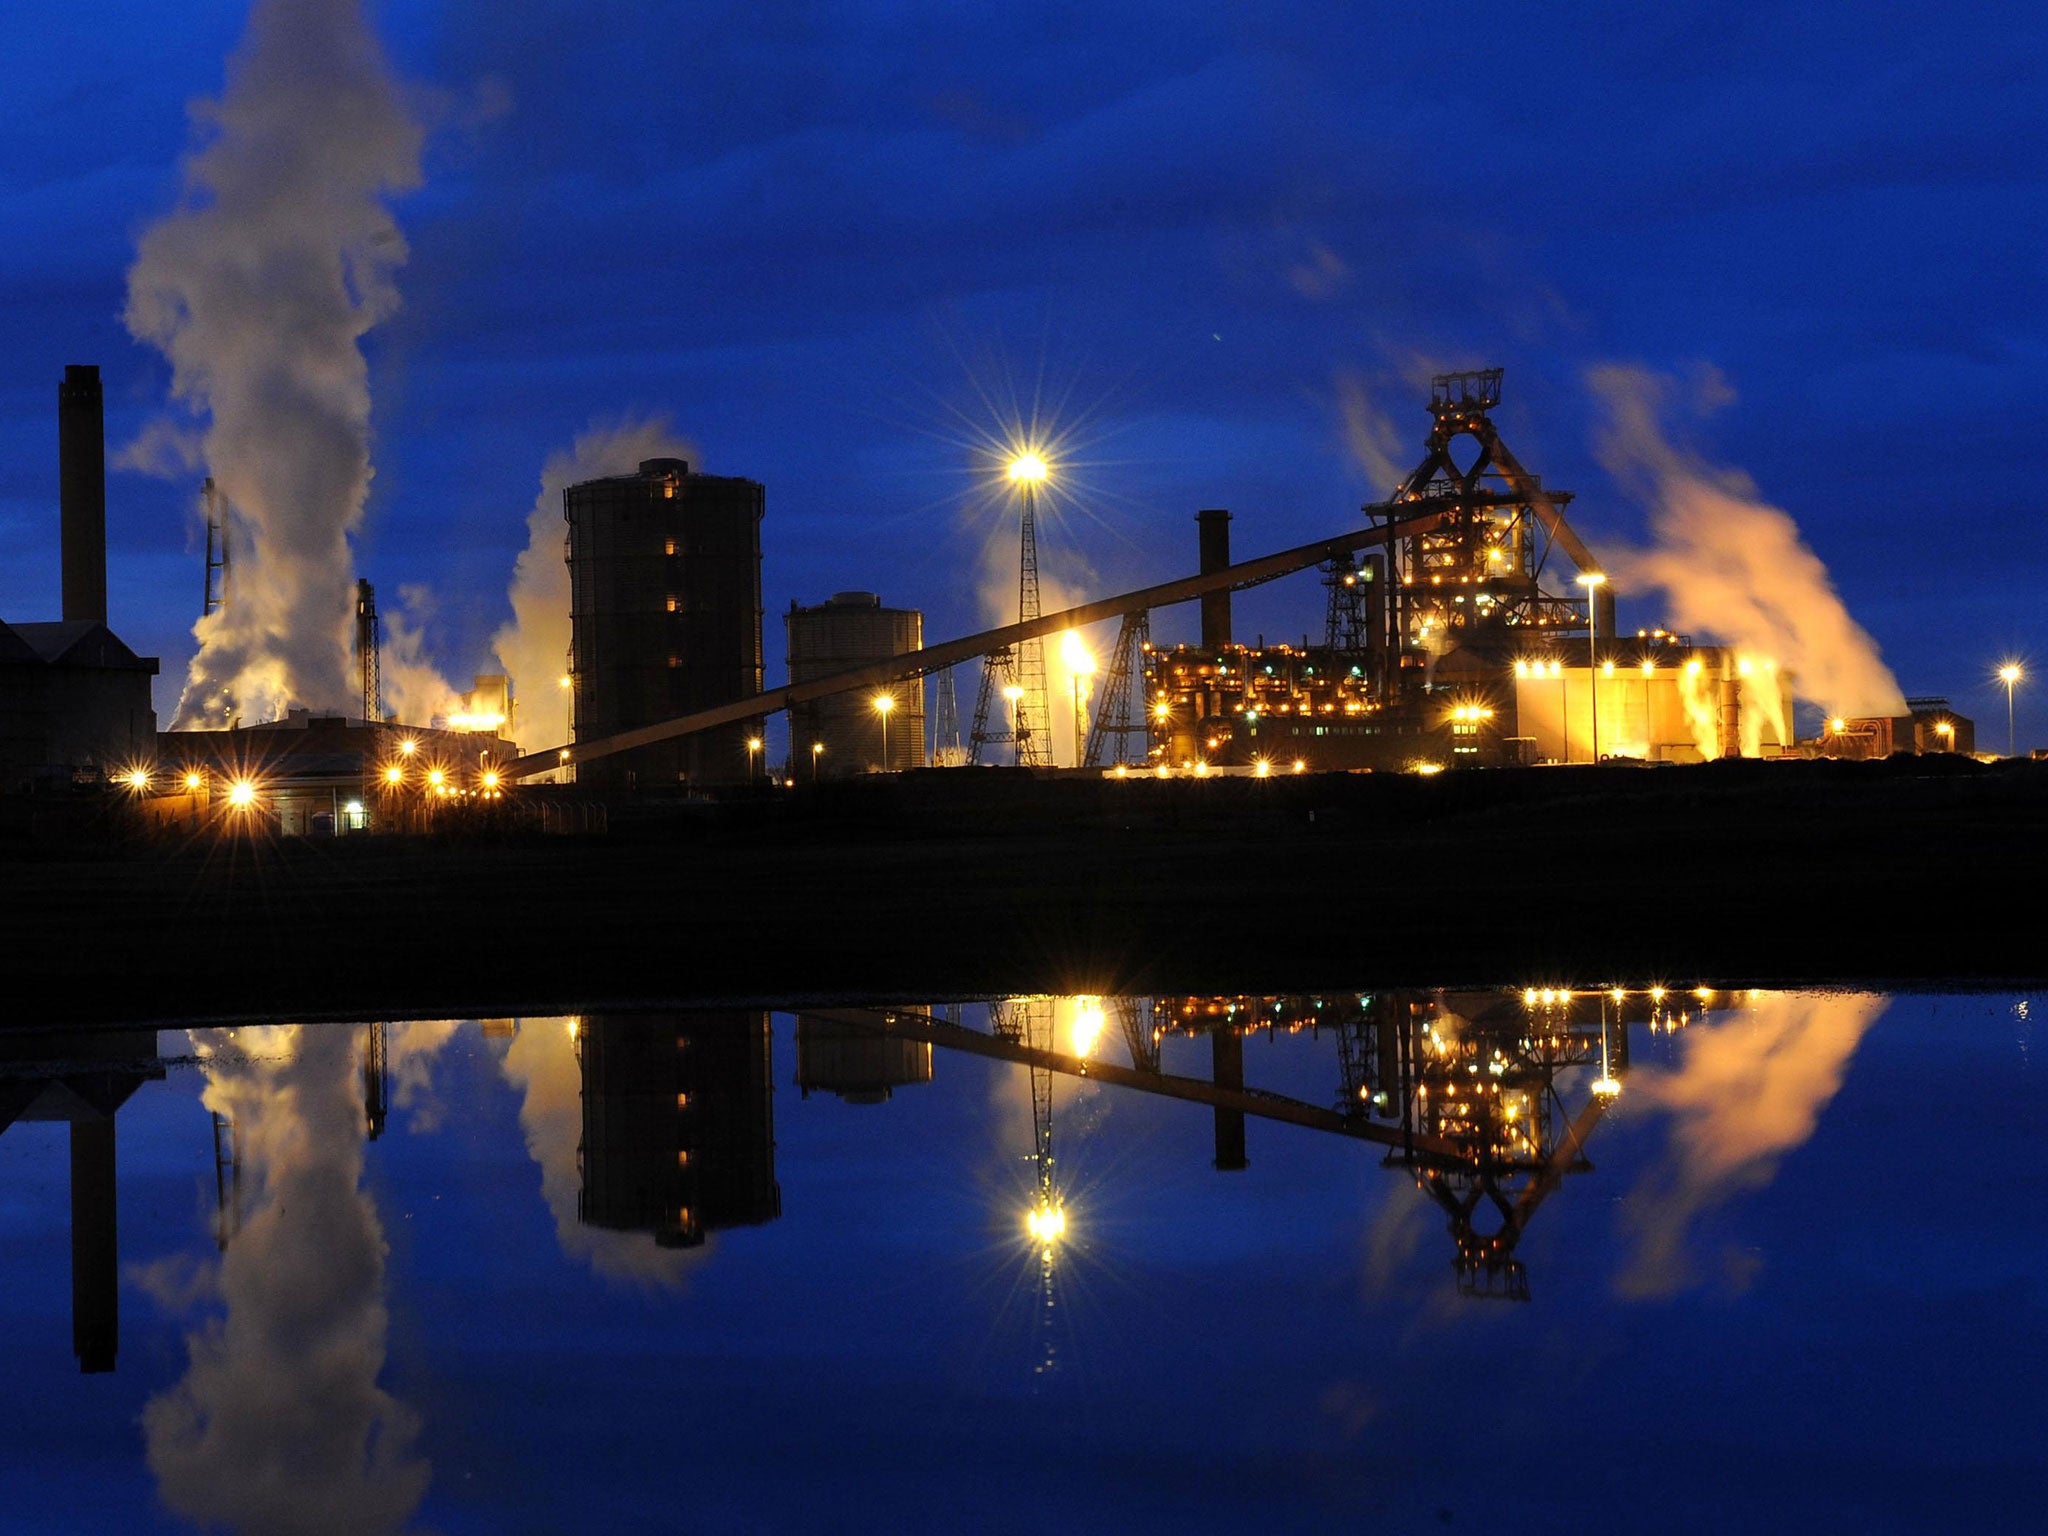 The owners of Redcar’s steelworks is unable to pay for the coal in three ships anchored nearby